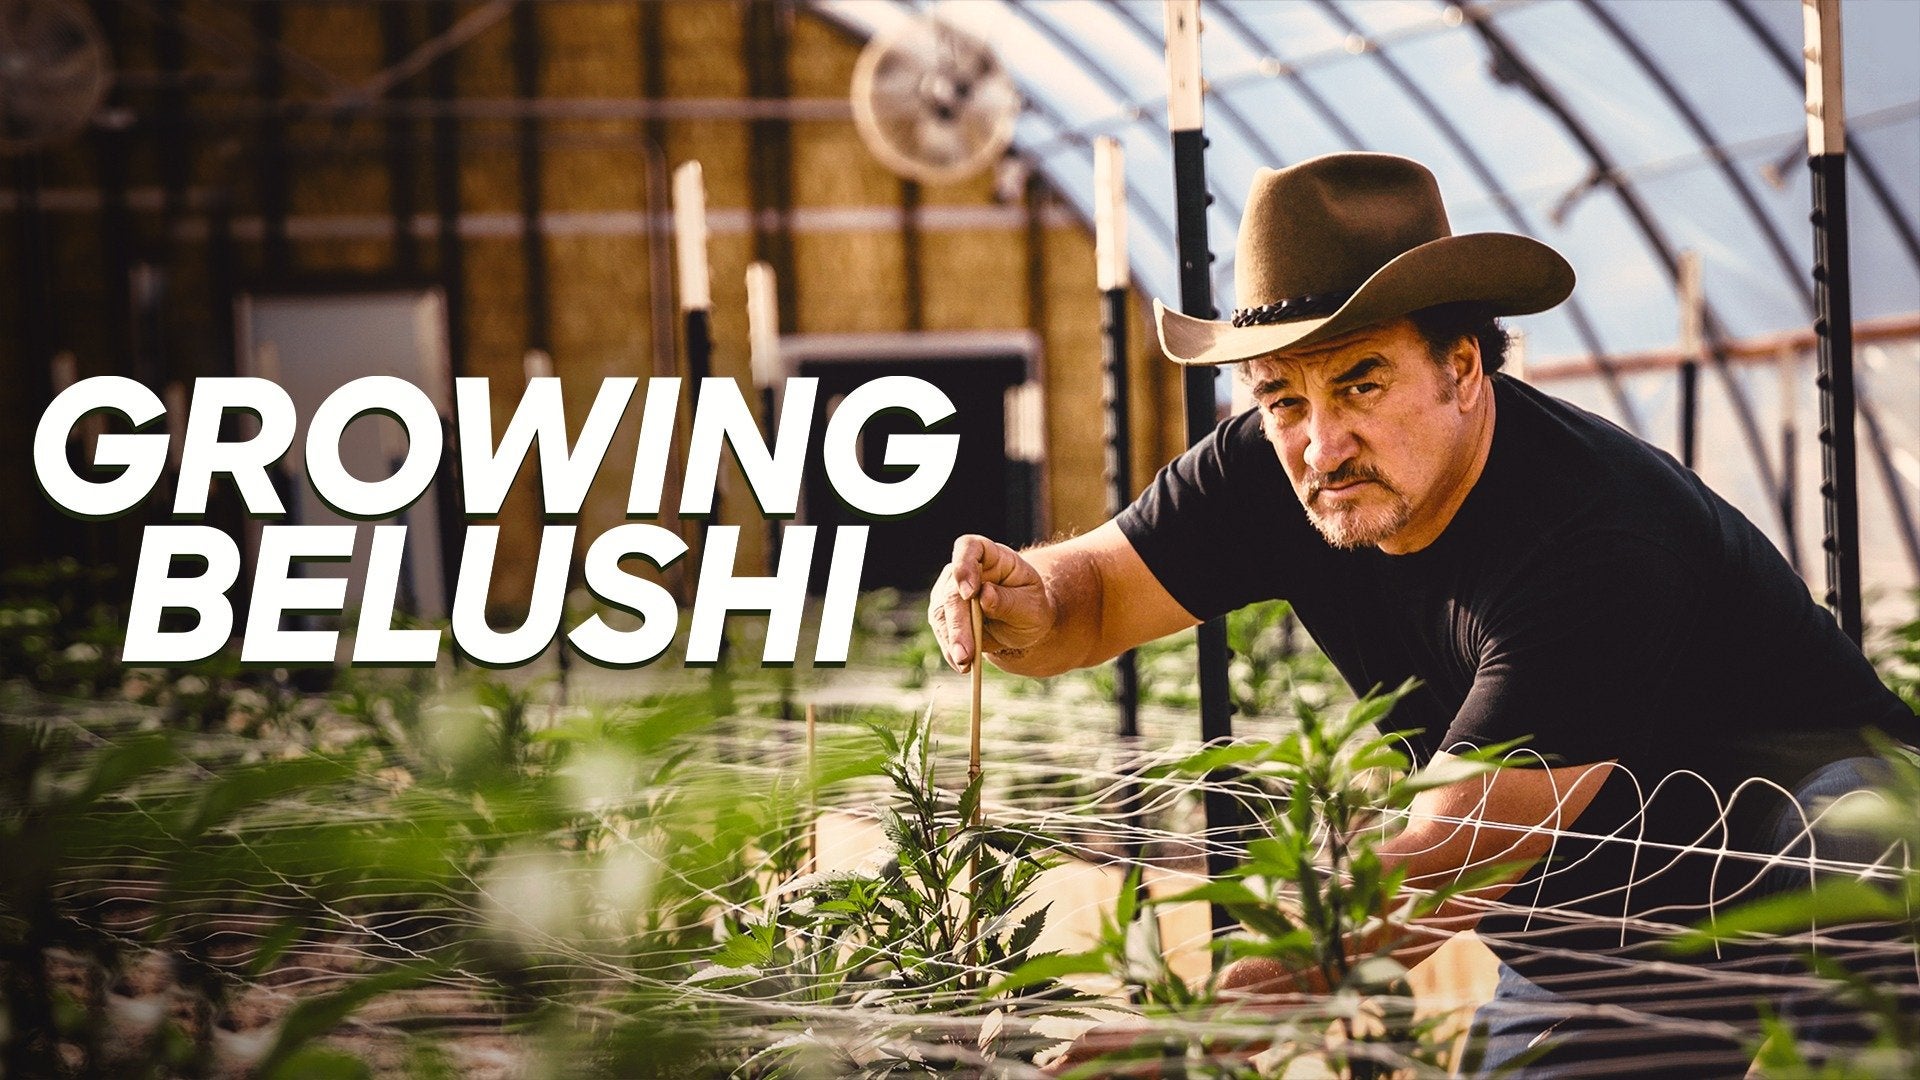 Growing Belushi S03E05 1080p HEVC x265  Can't Be Two Places at Once